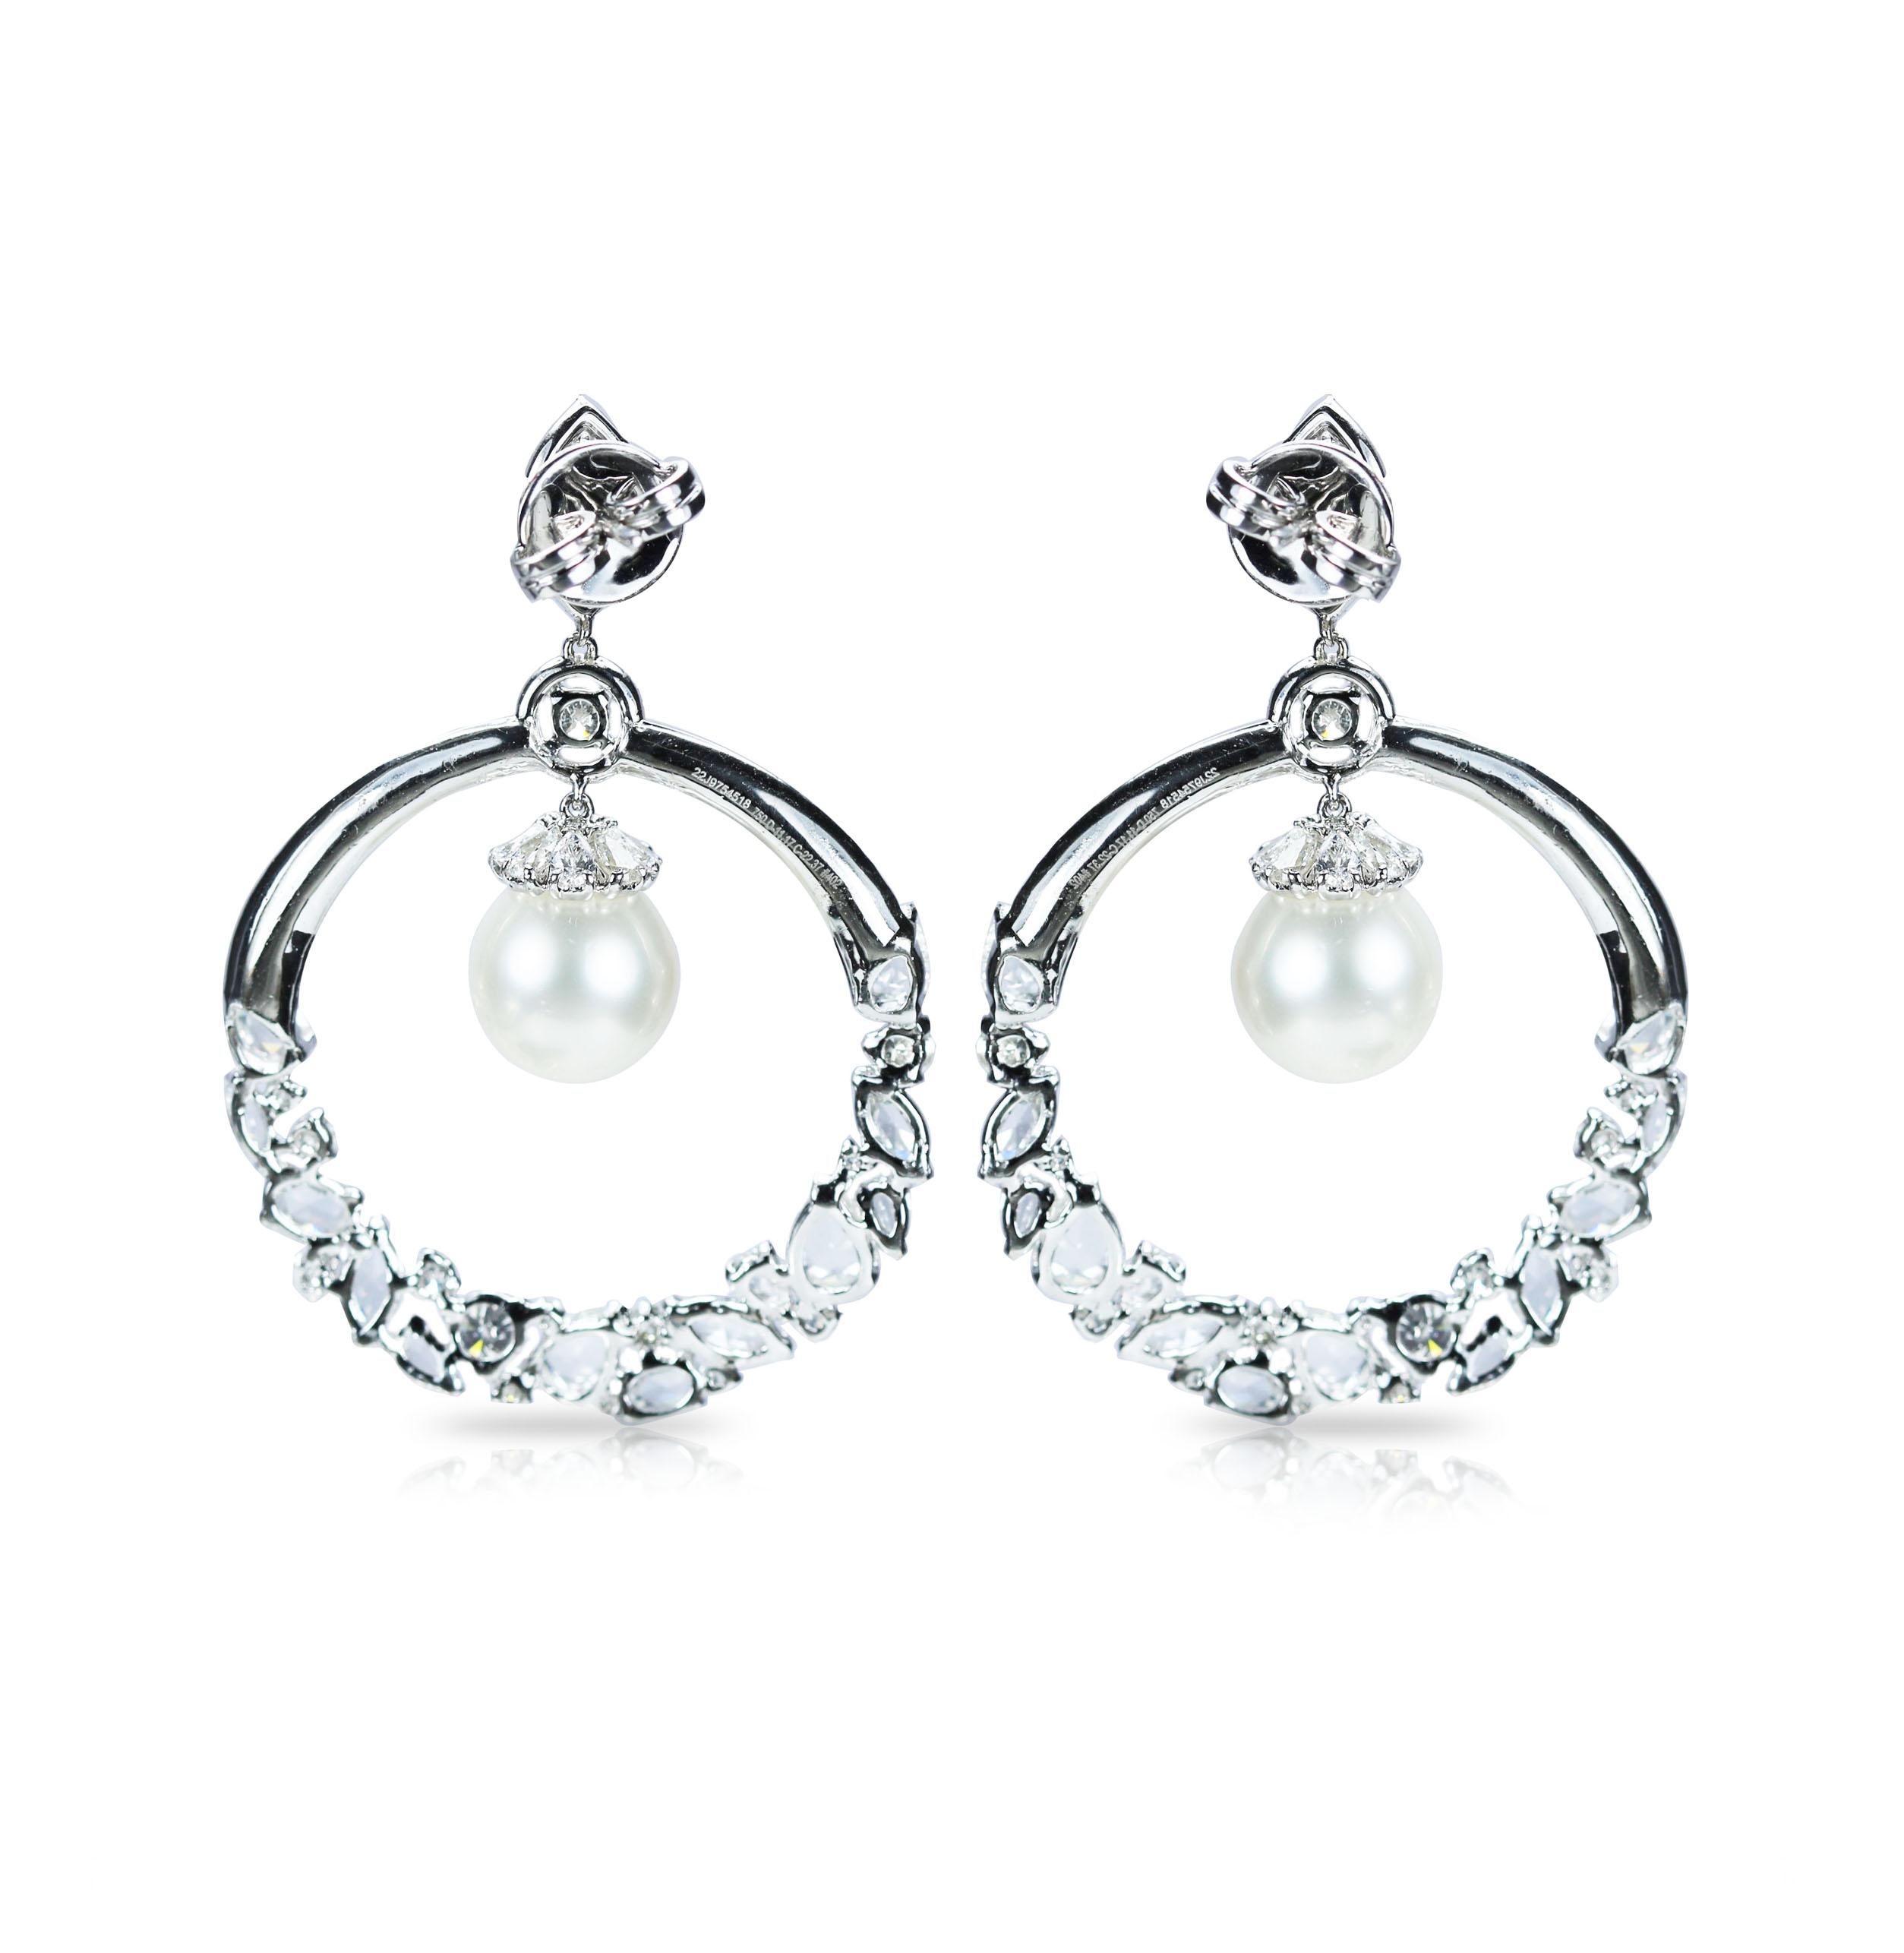 Brilliant cut and rosecut diamonds and south sea pearls earrings

Frost yourself with our pièce de résistance in 18K white gold featuring brilliant cut and rose cut diamonds, with delicate south sea pearls to enhance its beauty. The arresting pair